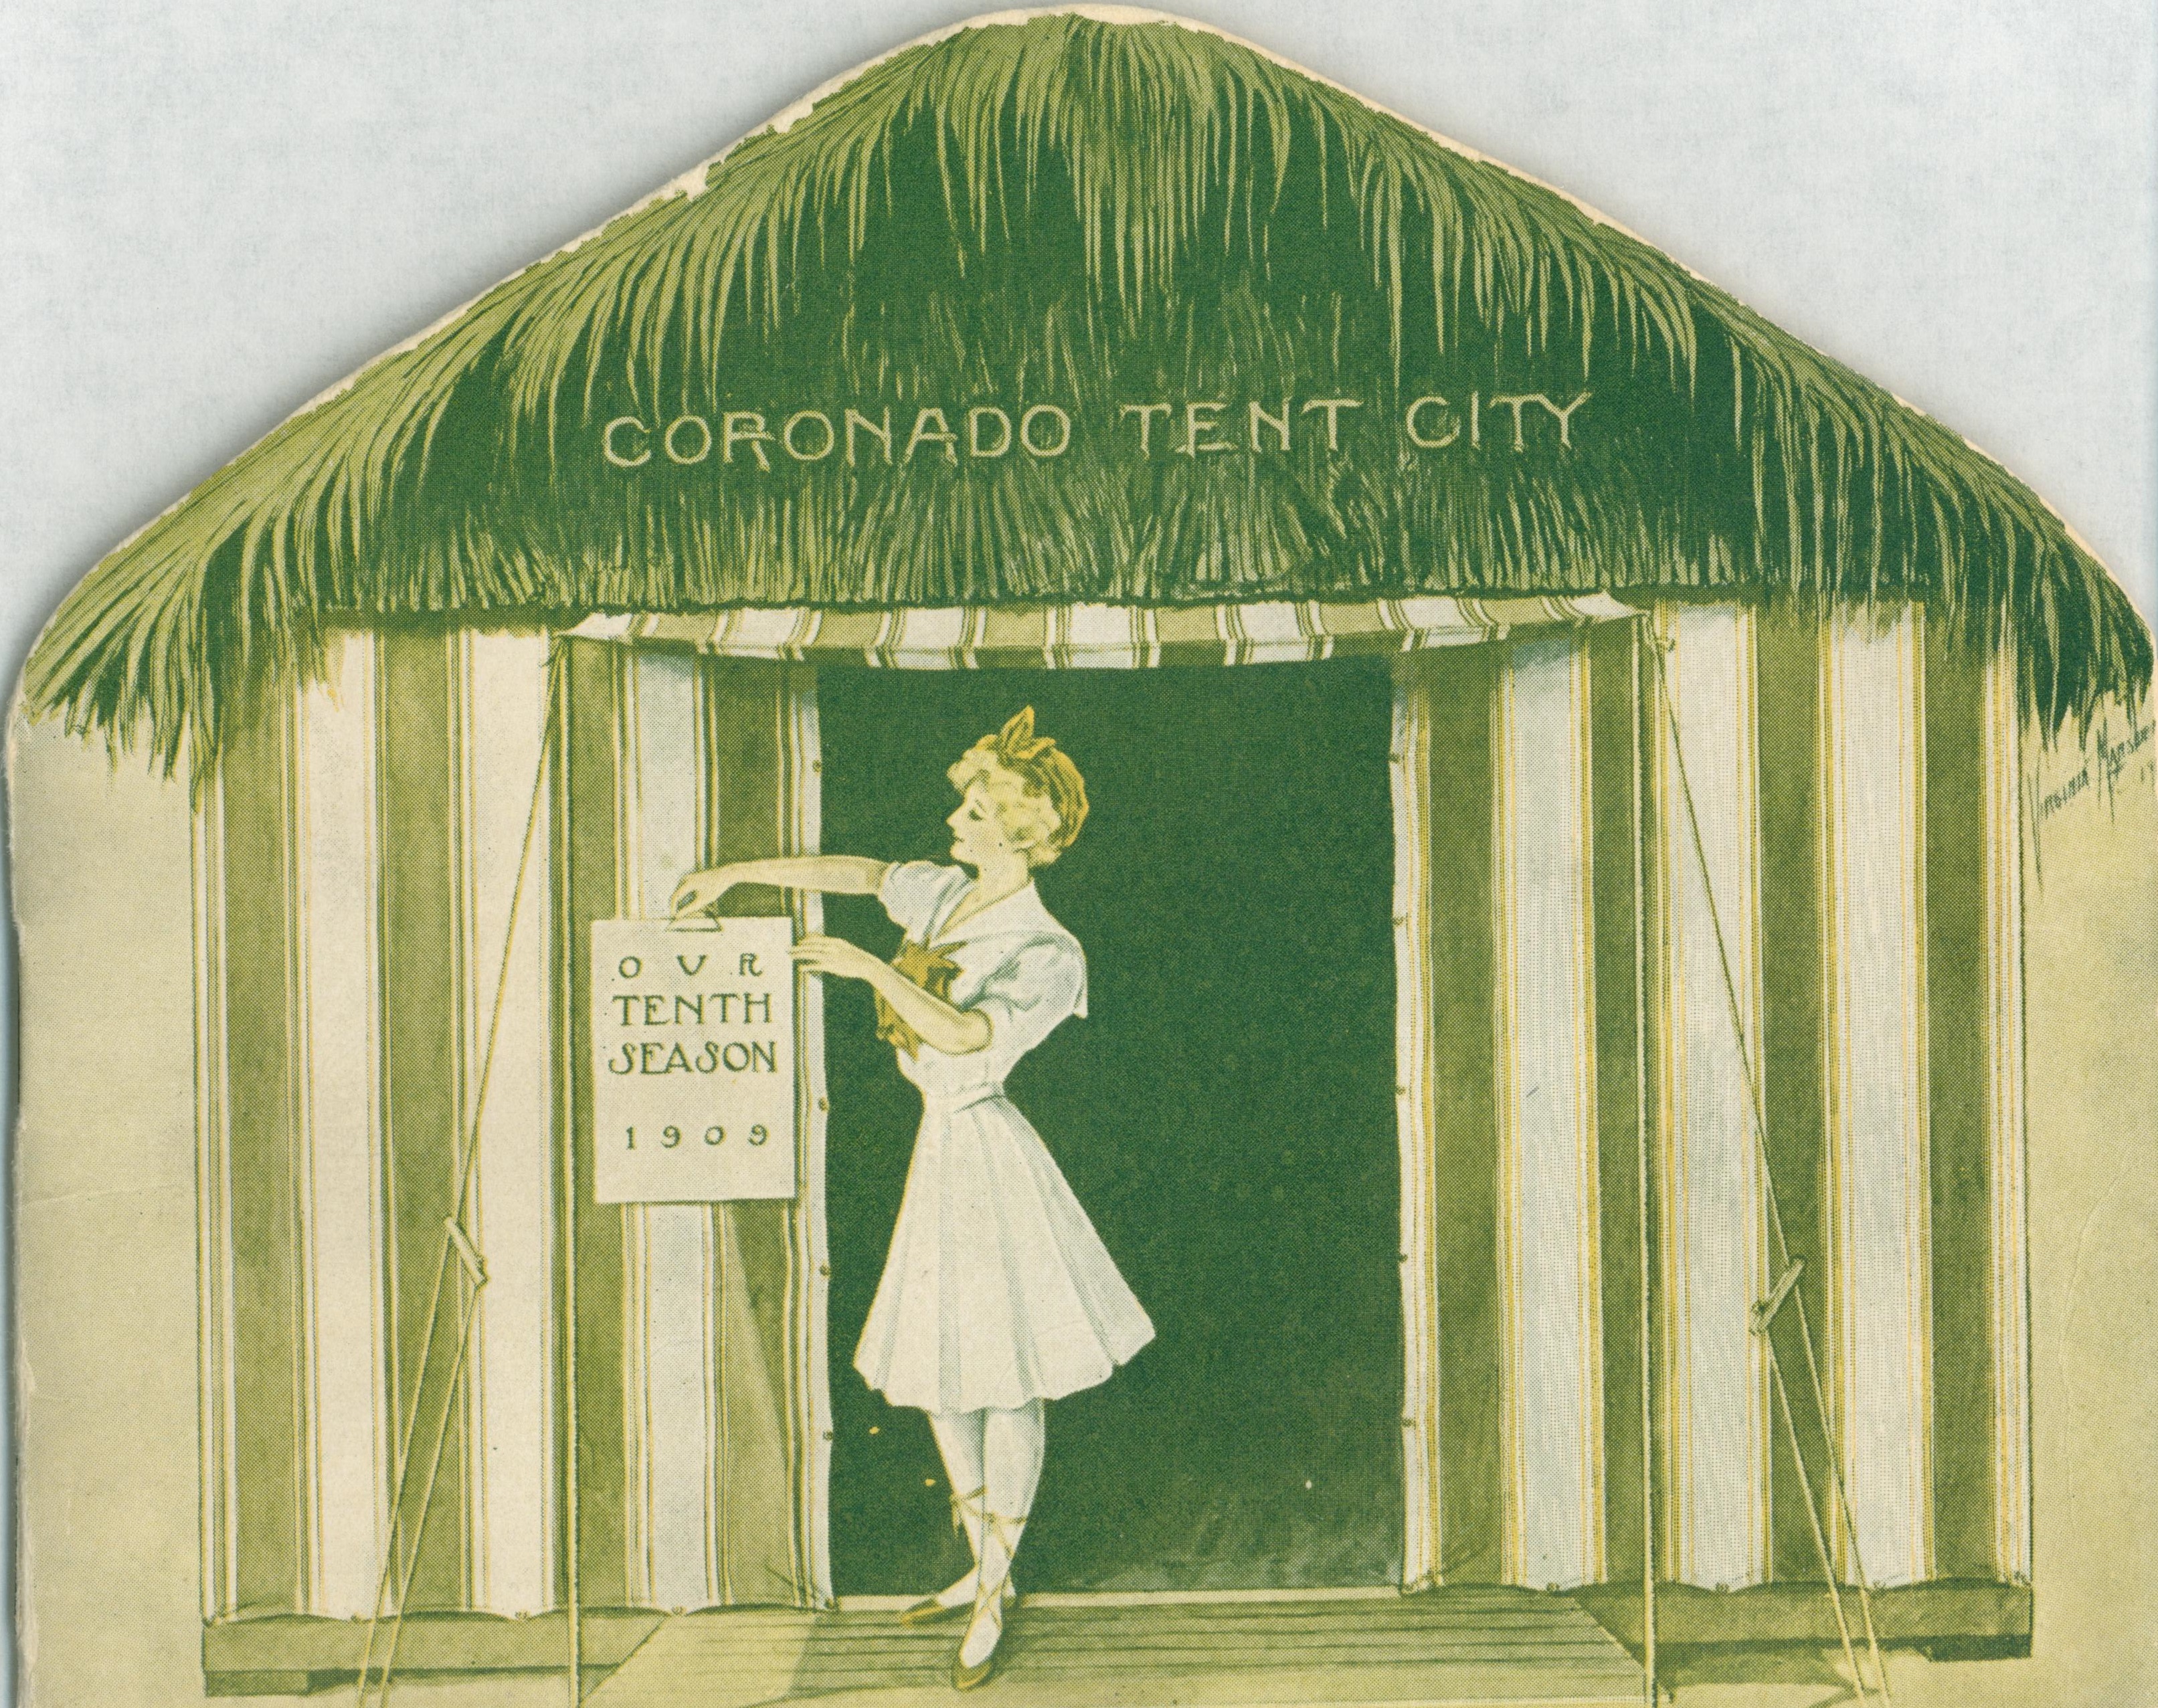 Booklet shaped like a green-striped tent. Shows a hostess lady at entrance of tent holding sign, 'Our Tenth Season / 1909. Joshua S. Hammond, Manager, Coronado Tent City, Coronado, California.